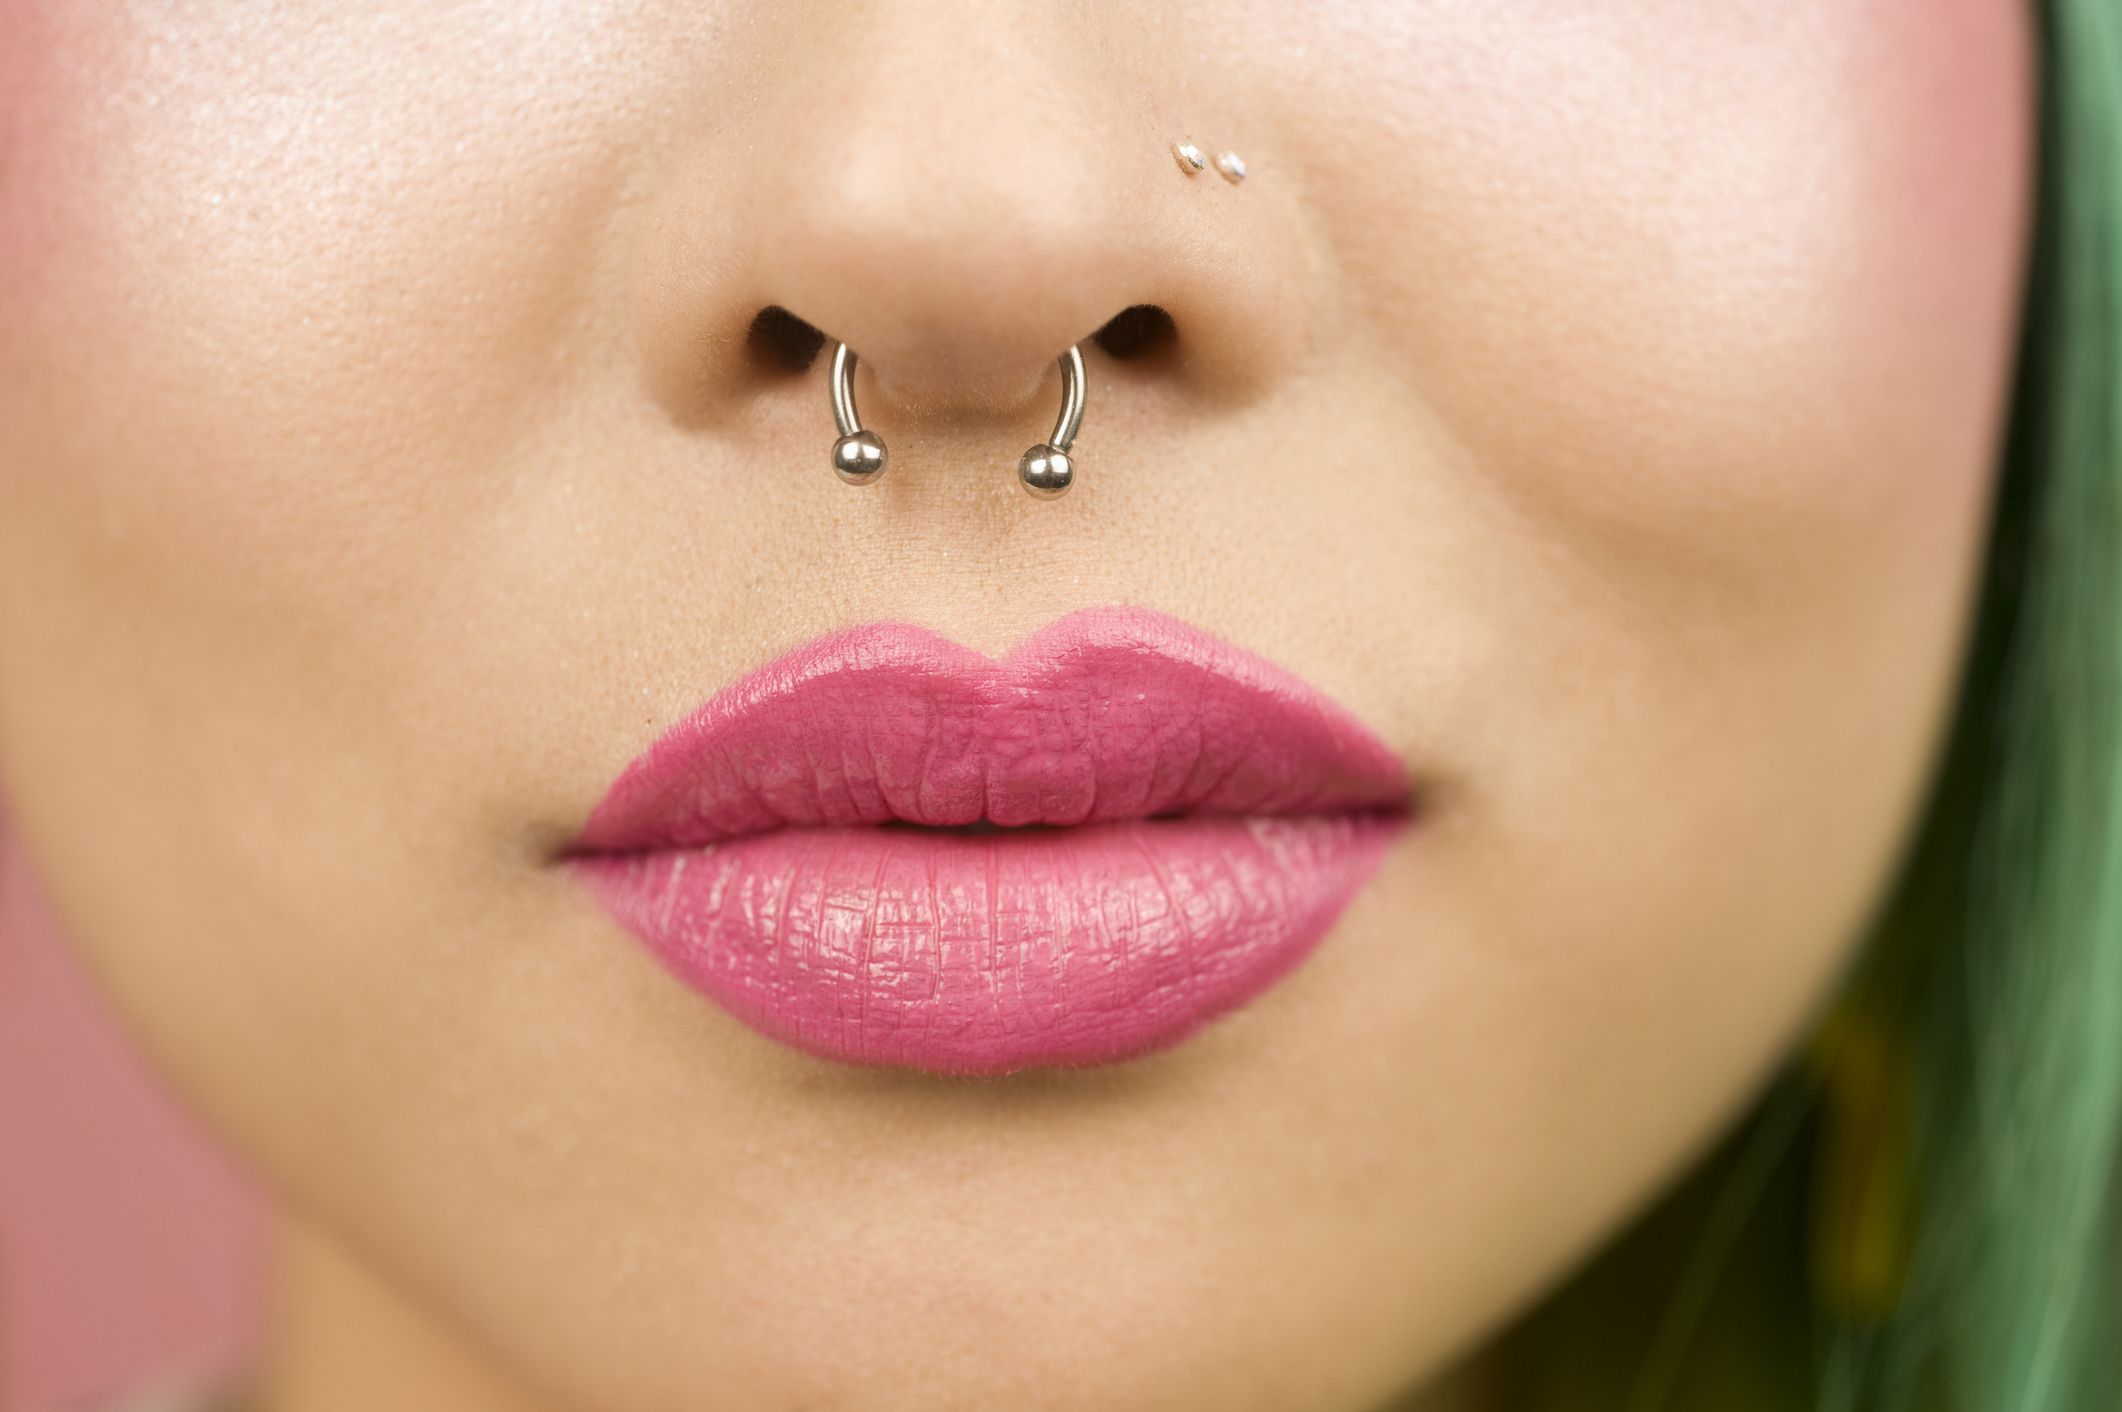 nose piercing stock getty